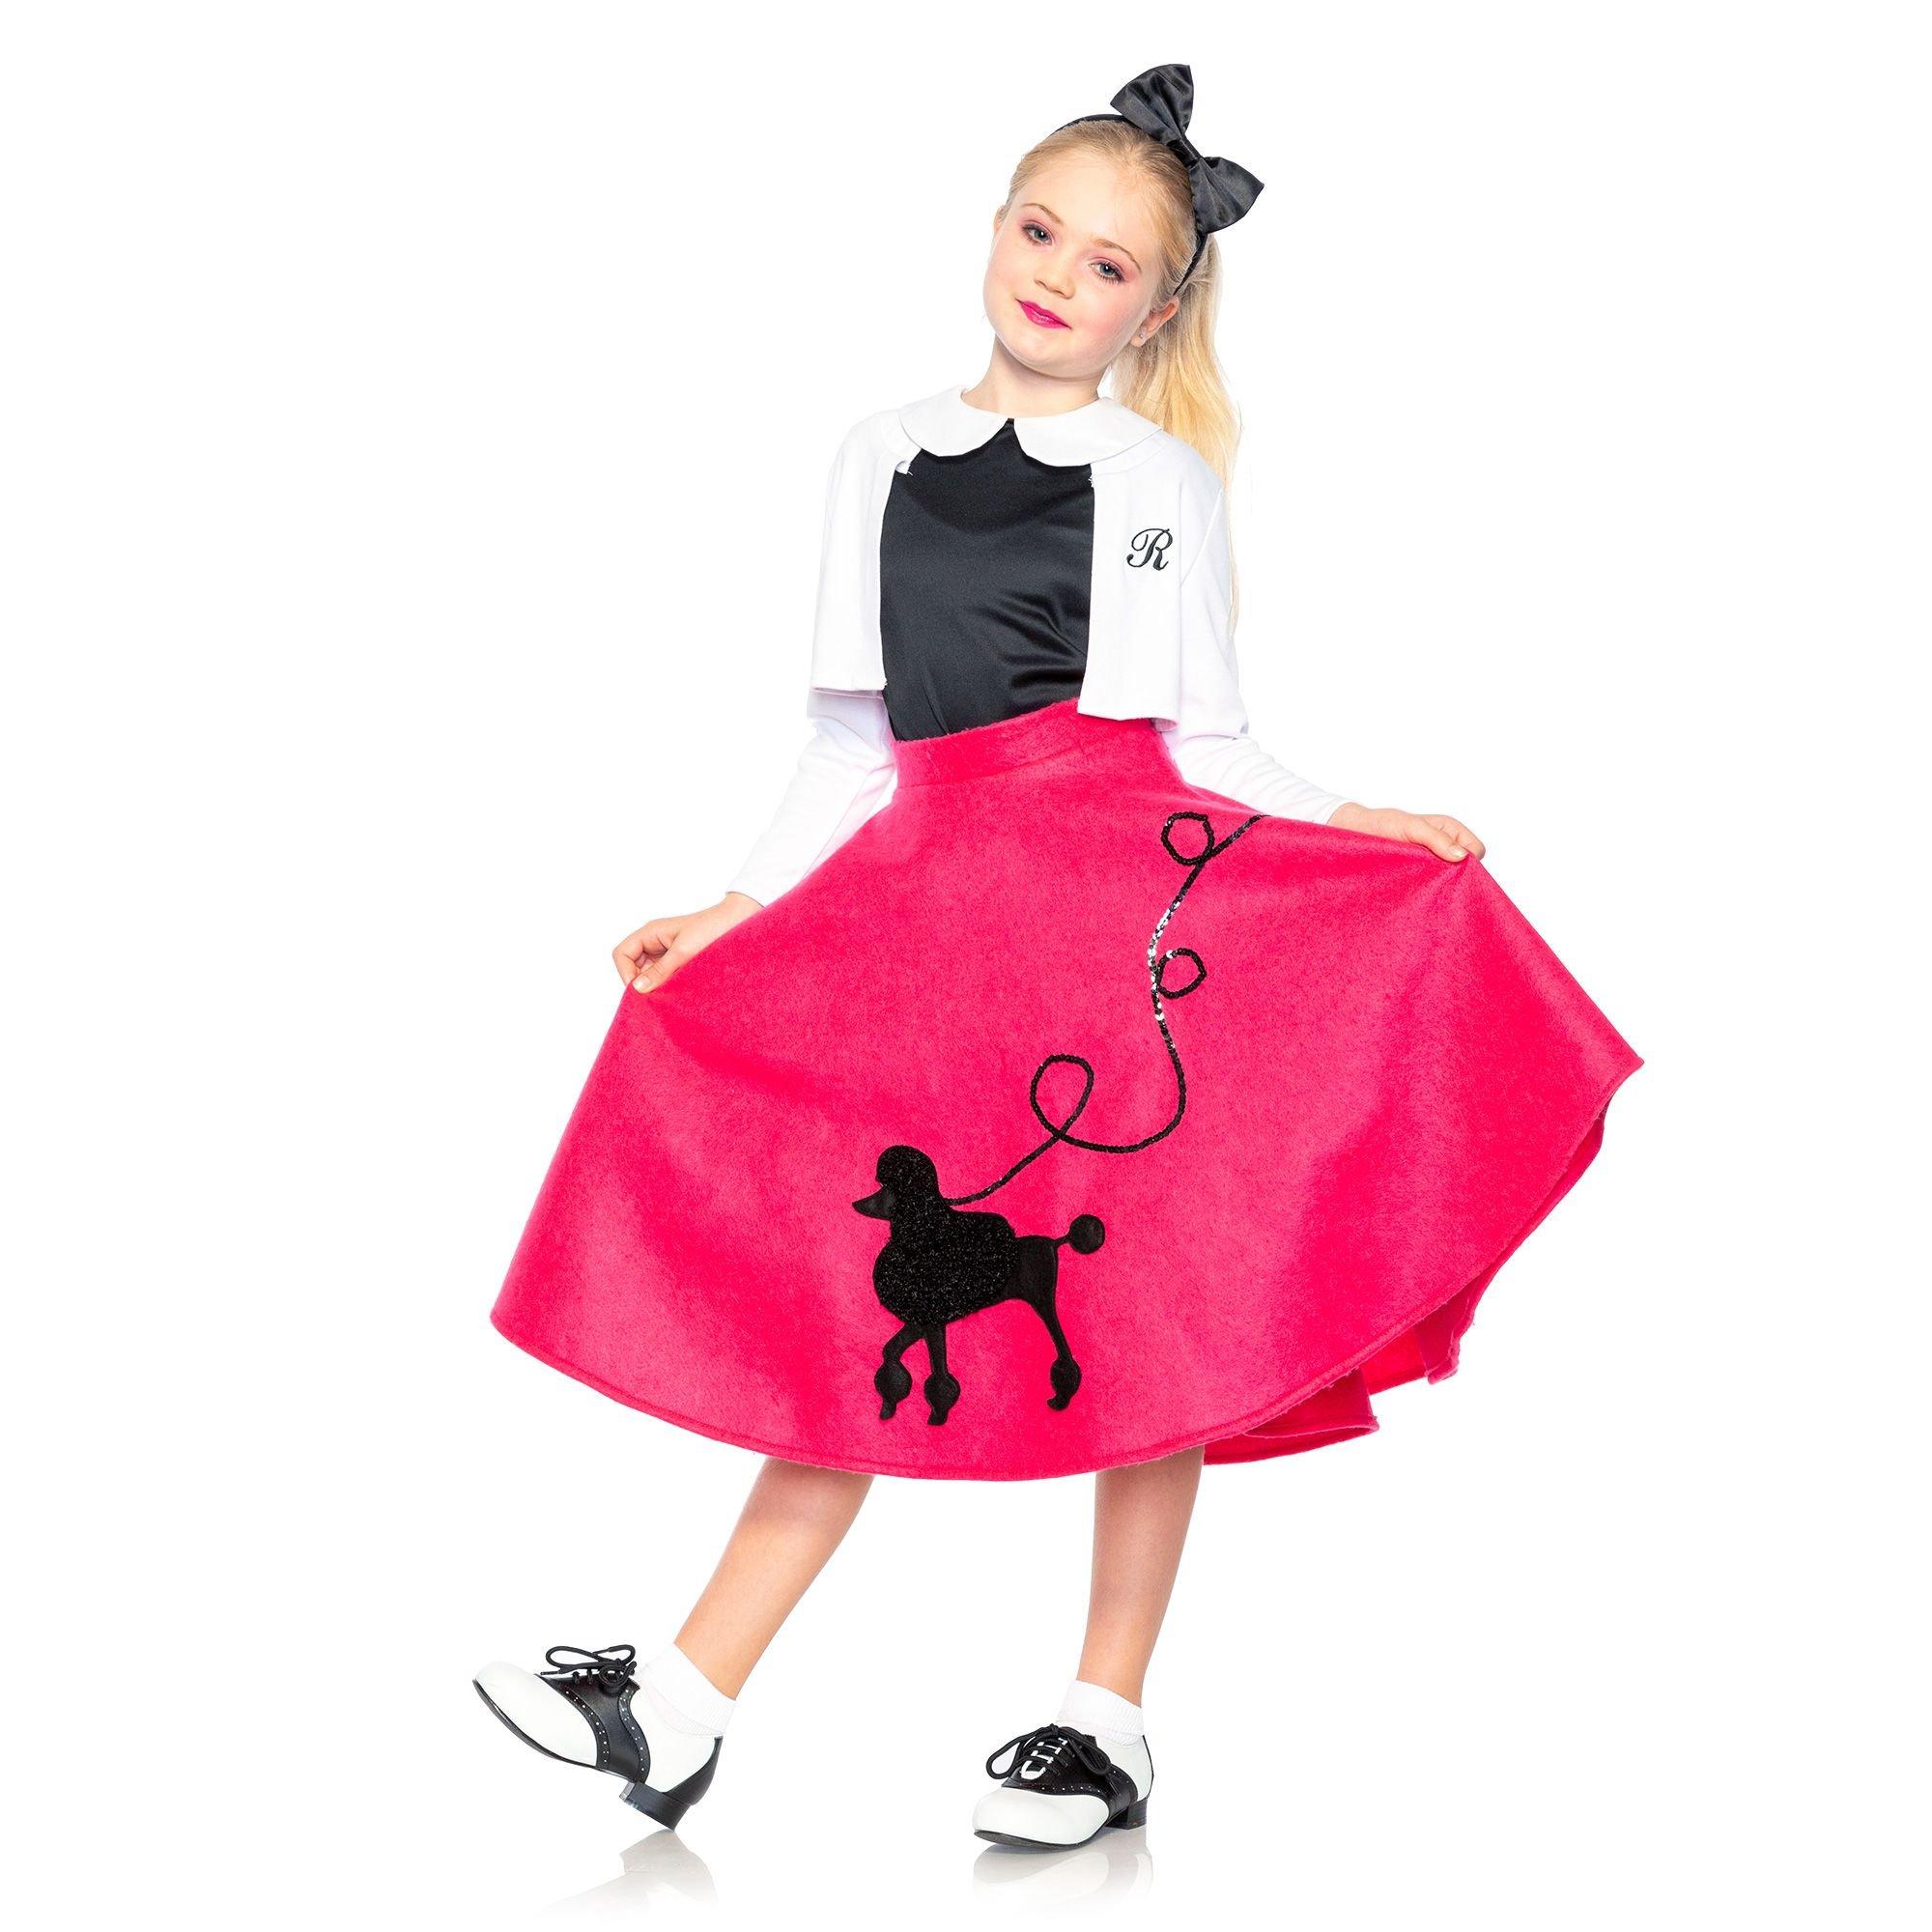 Adult Poodle Skirt With Musical Note Printed Scarf Hot Pink Blue By Kid Costumes Halloween Cosplay